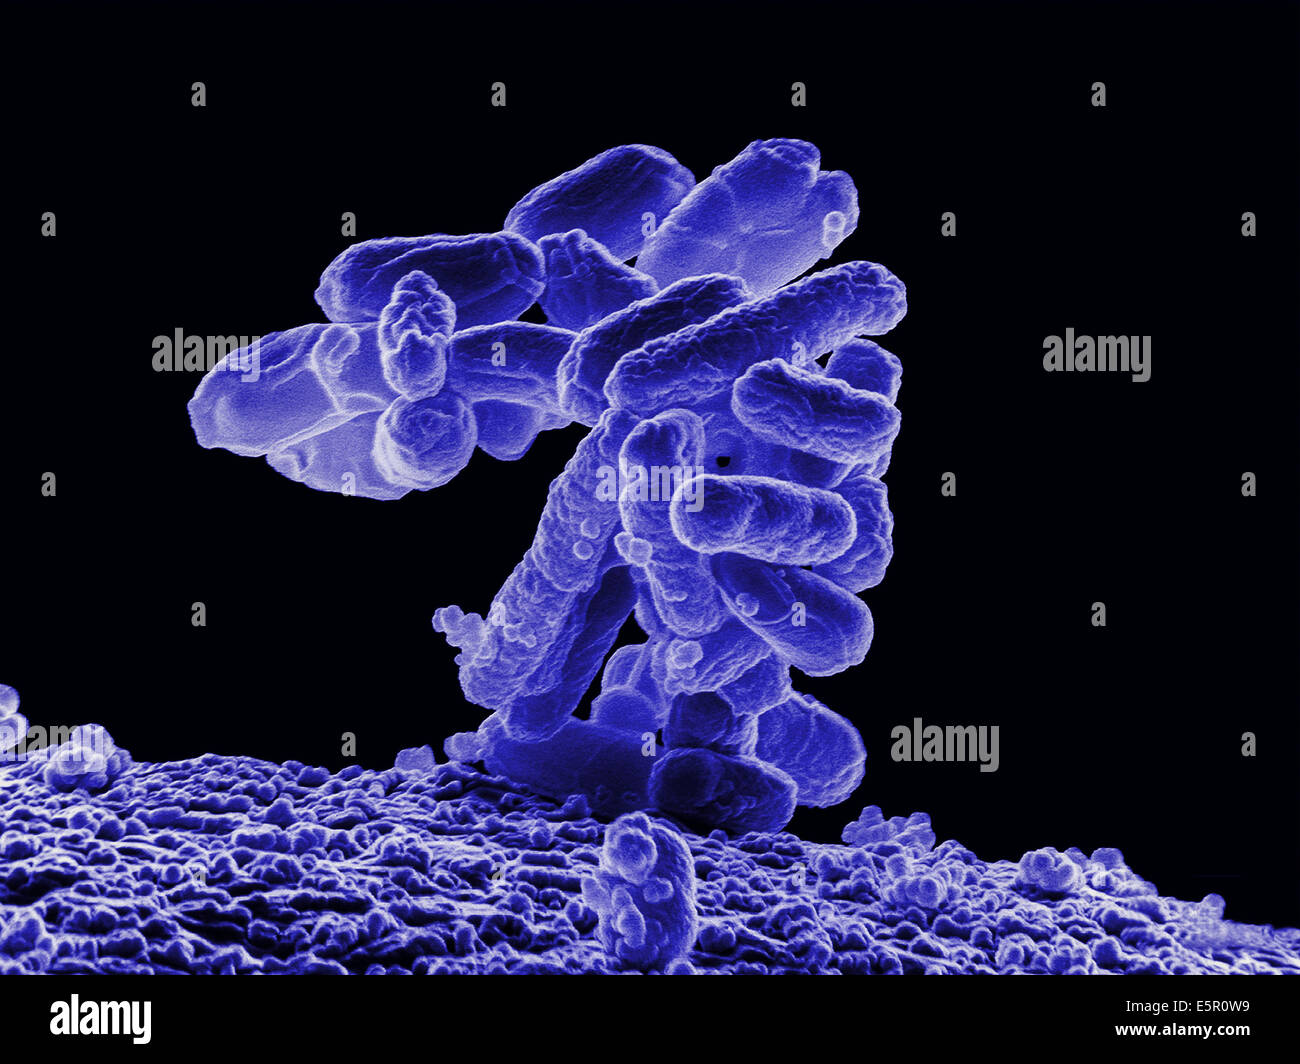 Scanning electron micrograph (SEM) of a cluster of Escherichia coli bacteria. Magnification 10000x. Stock Photo